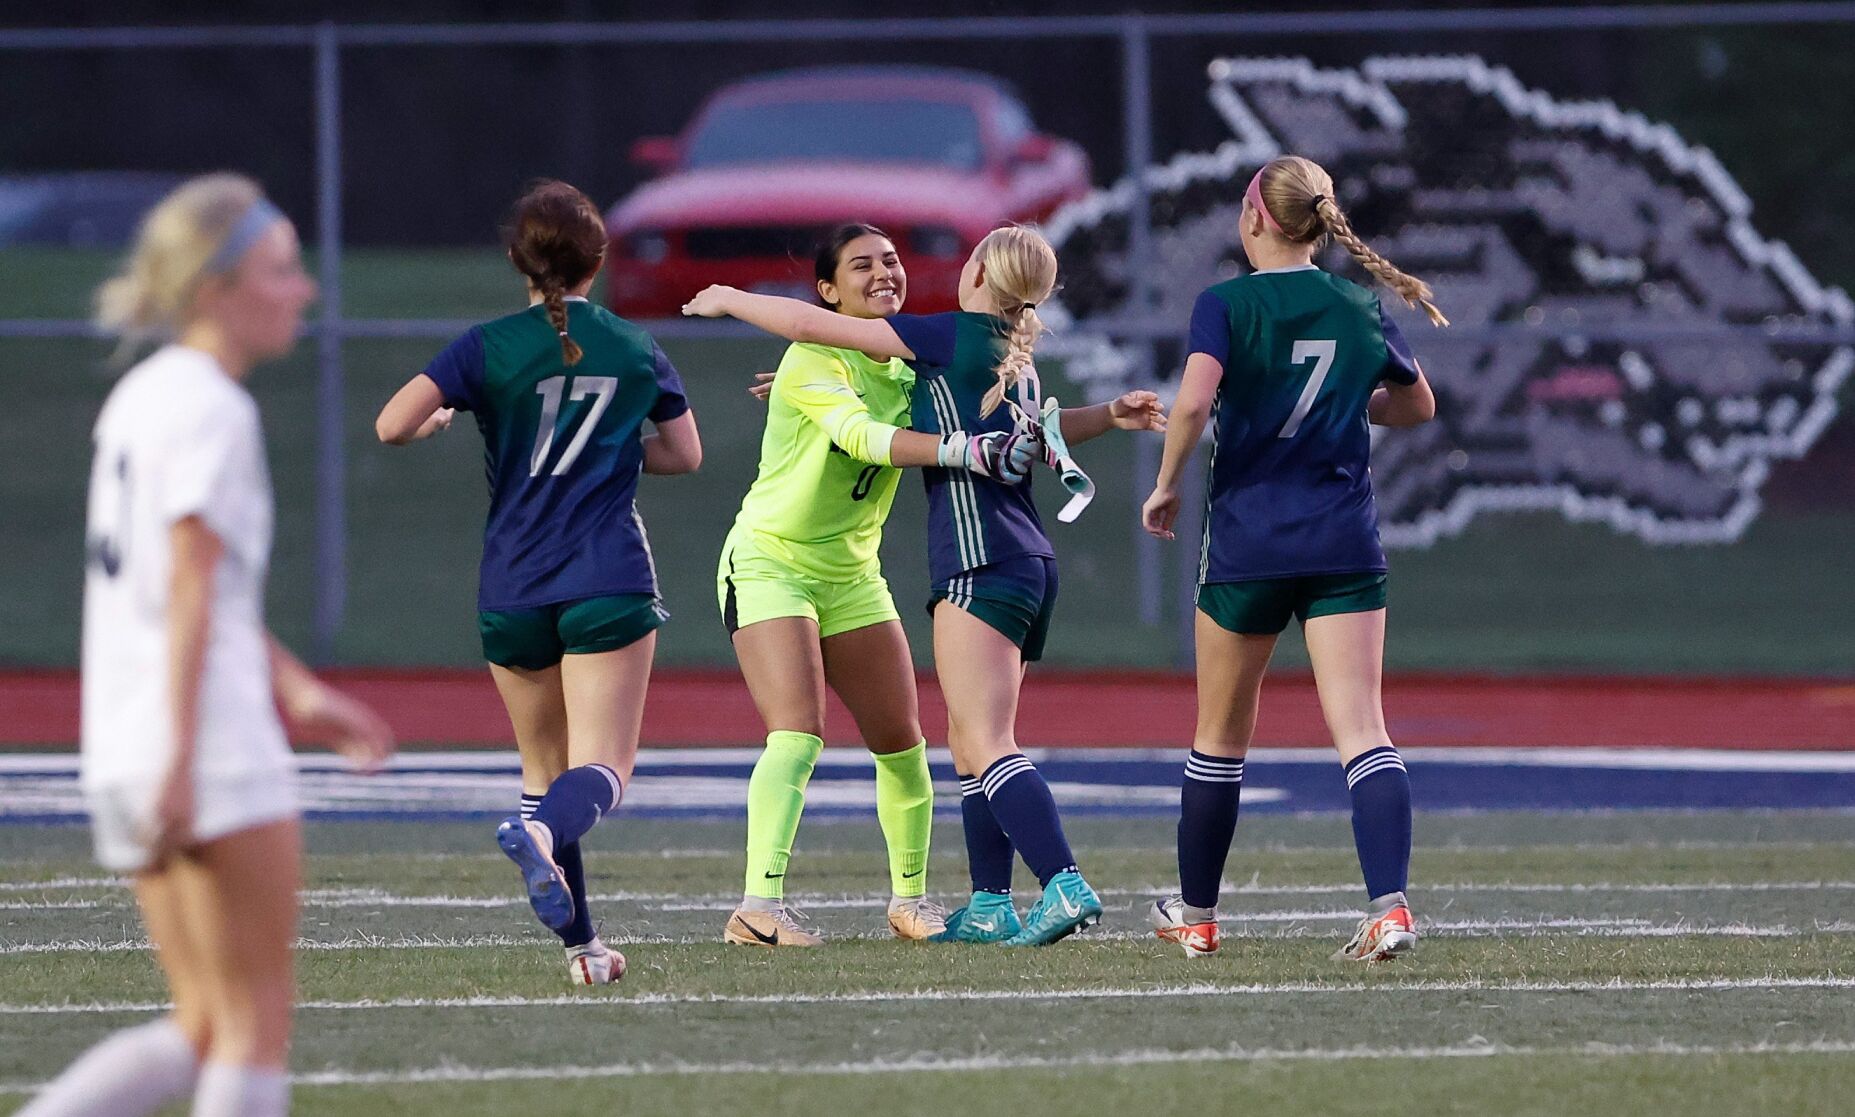 Timberland High Makes History with Victory Over Francis Howell Central in Girls Soccer Match